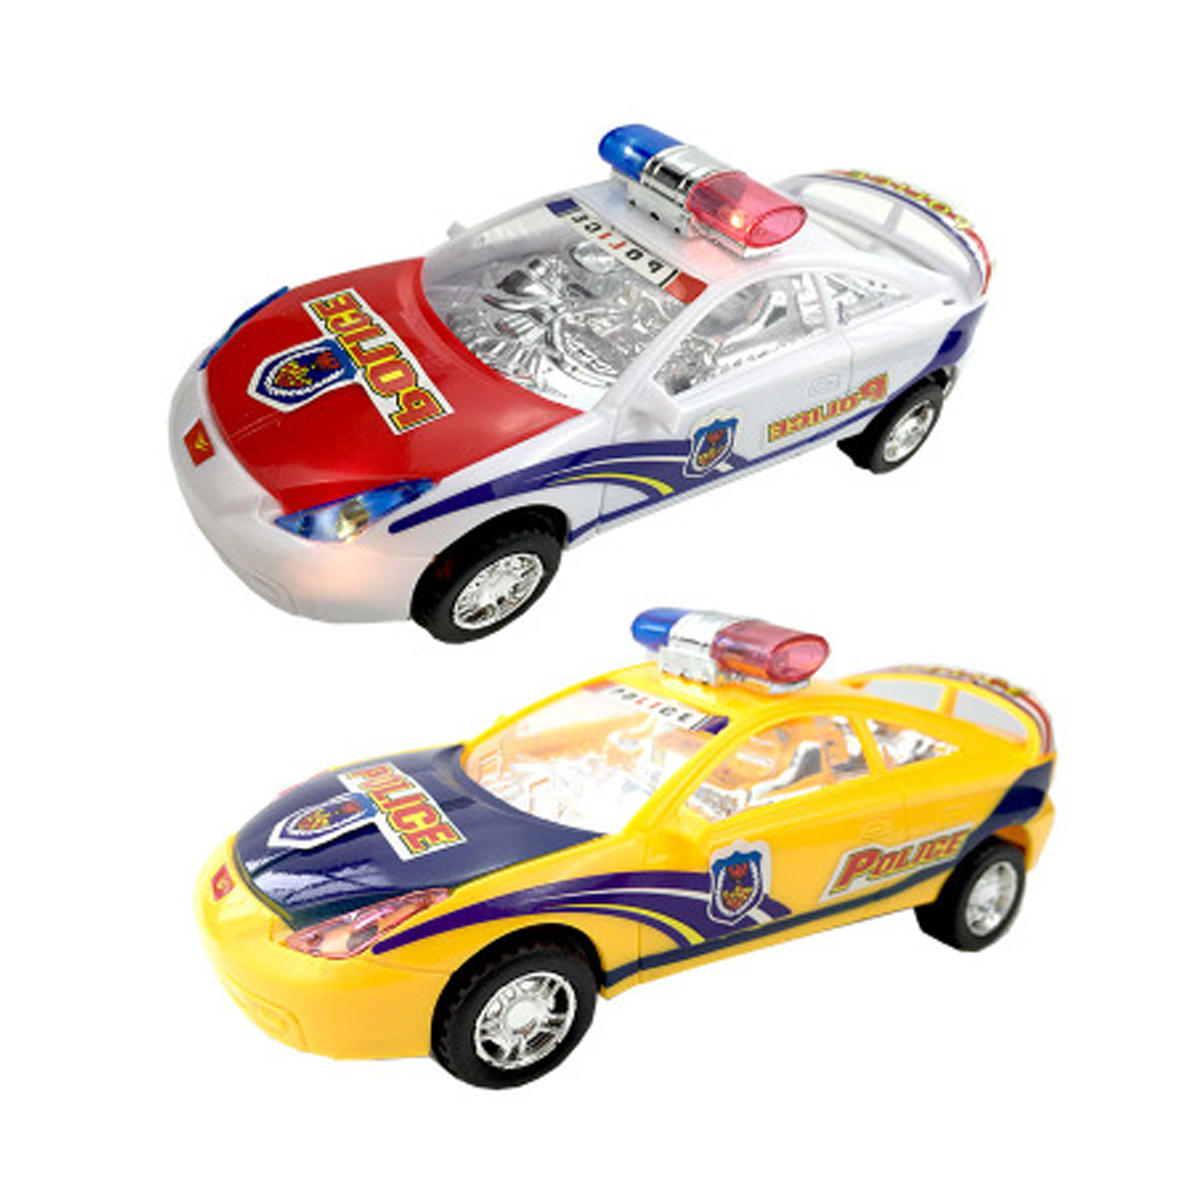 Children's Electric Alloy Simulation Po lice Car Diecast Model Toy with LED Light and Music